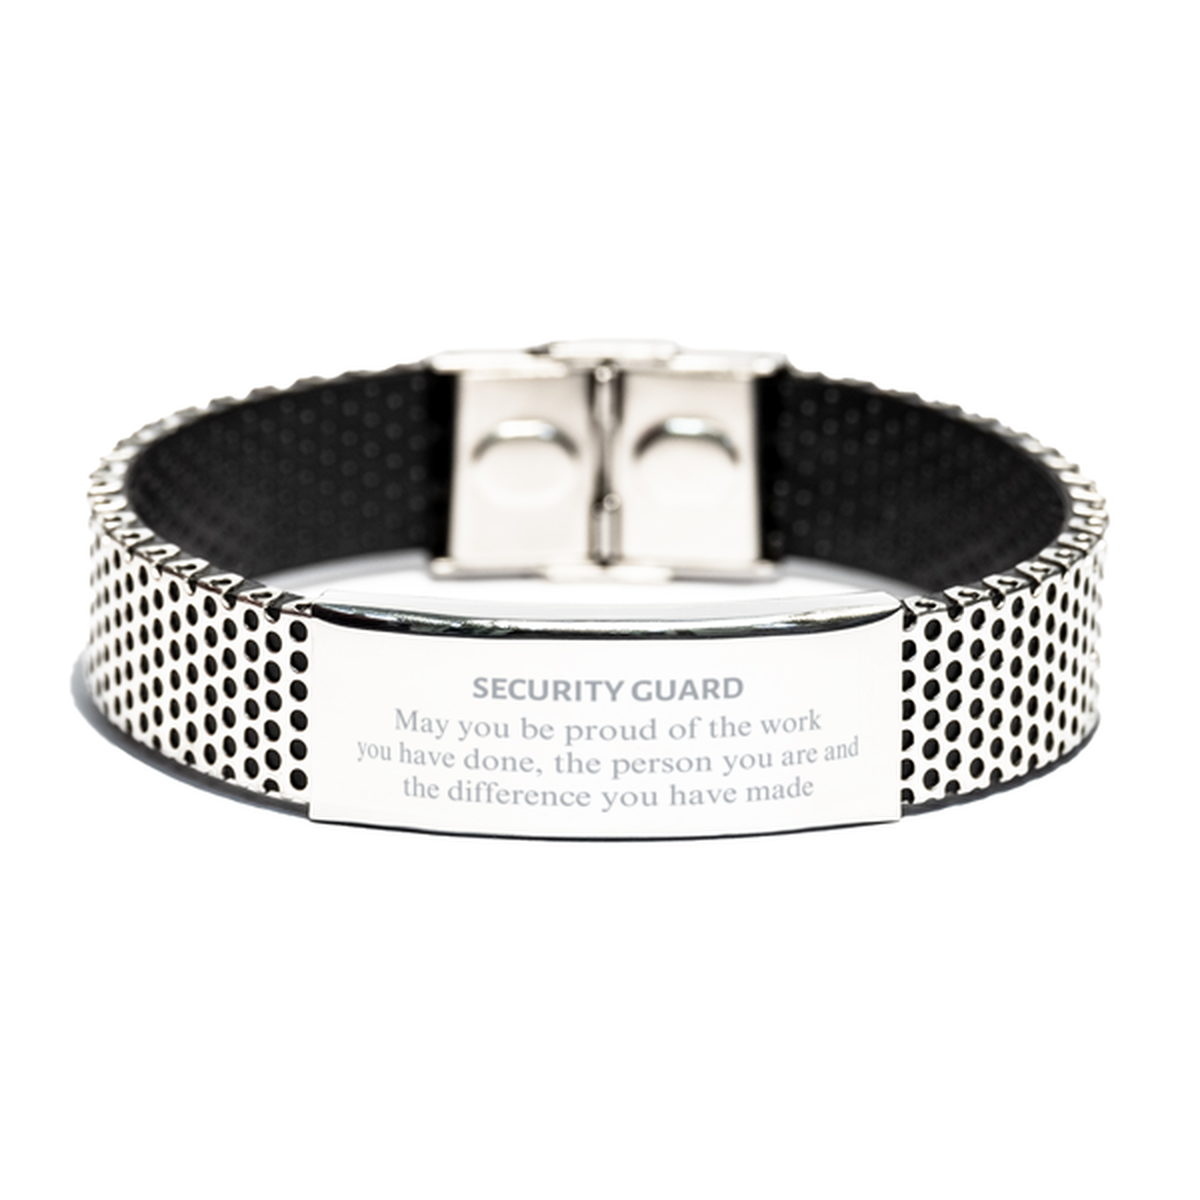 Security Guard May you be proud of the work you have done, Retirement Security Guard Stainless Steel Bracelet for Colleague Appreciation Gifts Amazing for Security Guard